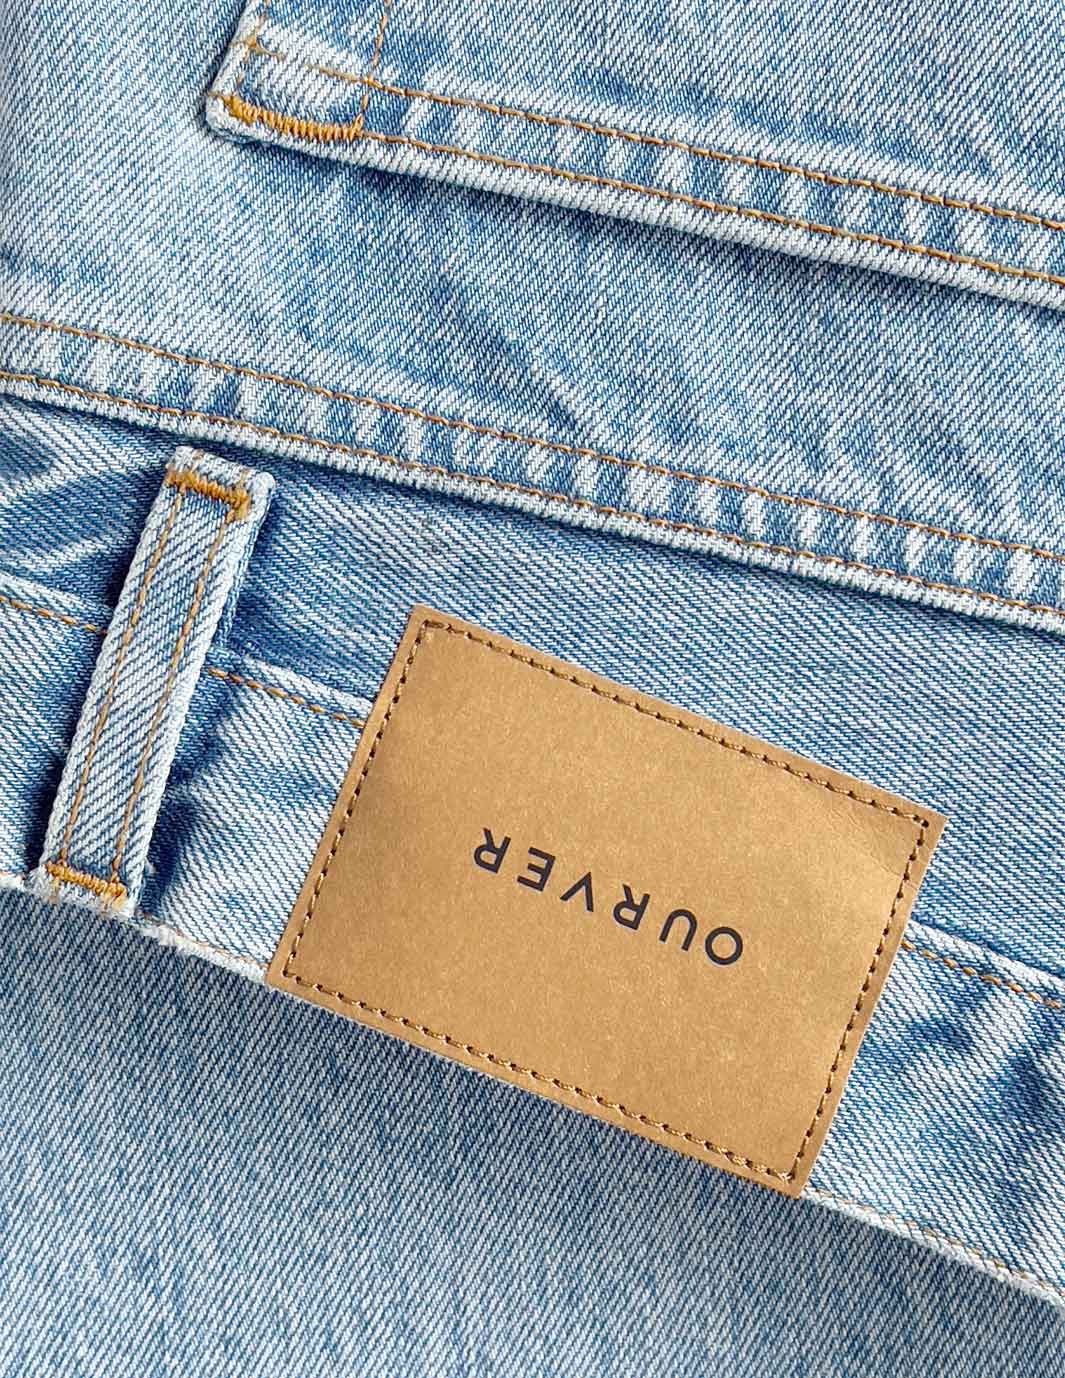 Industry Focus: Denim—What advancements and innovations within denim make  you hopeful for the future of the industry, and how will these  contributions create progress in the category? | California Apparel News